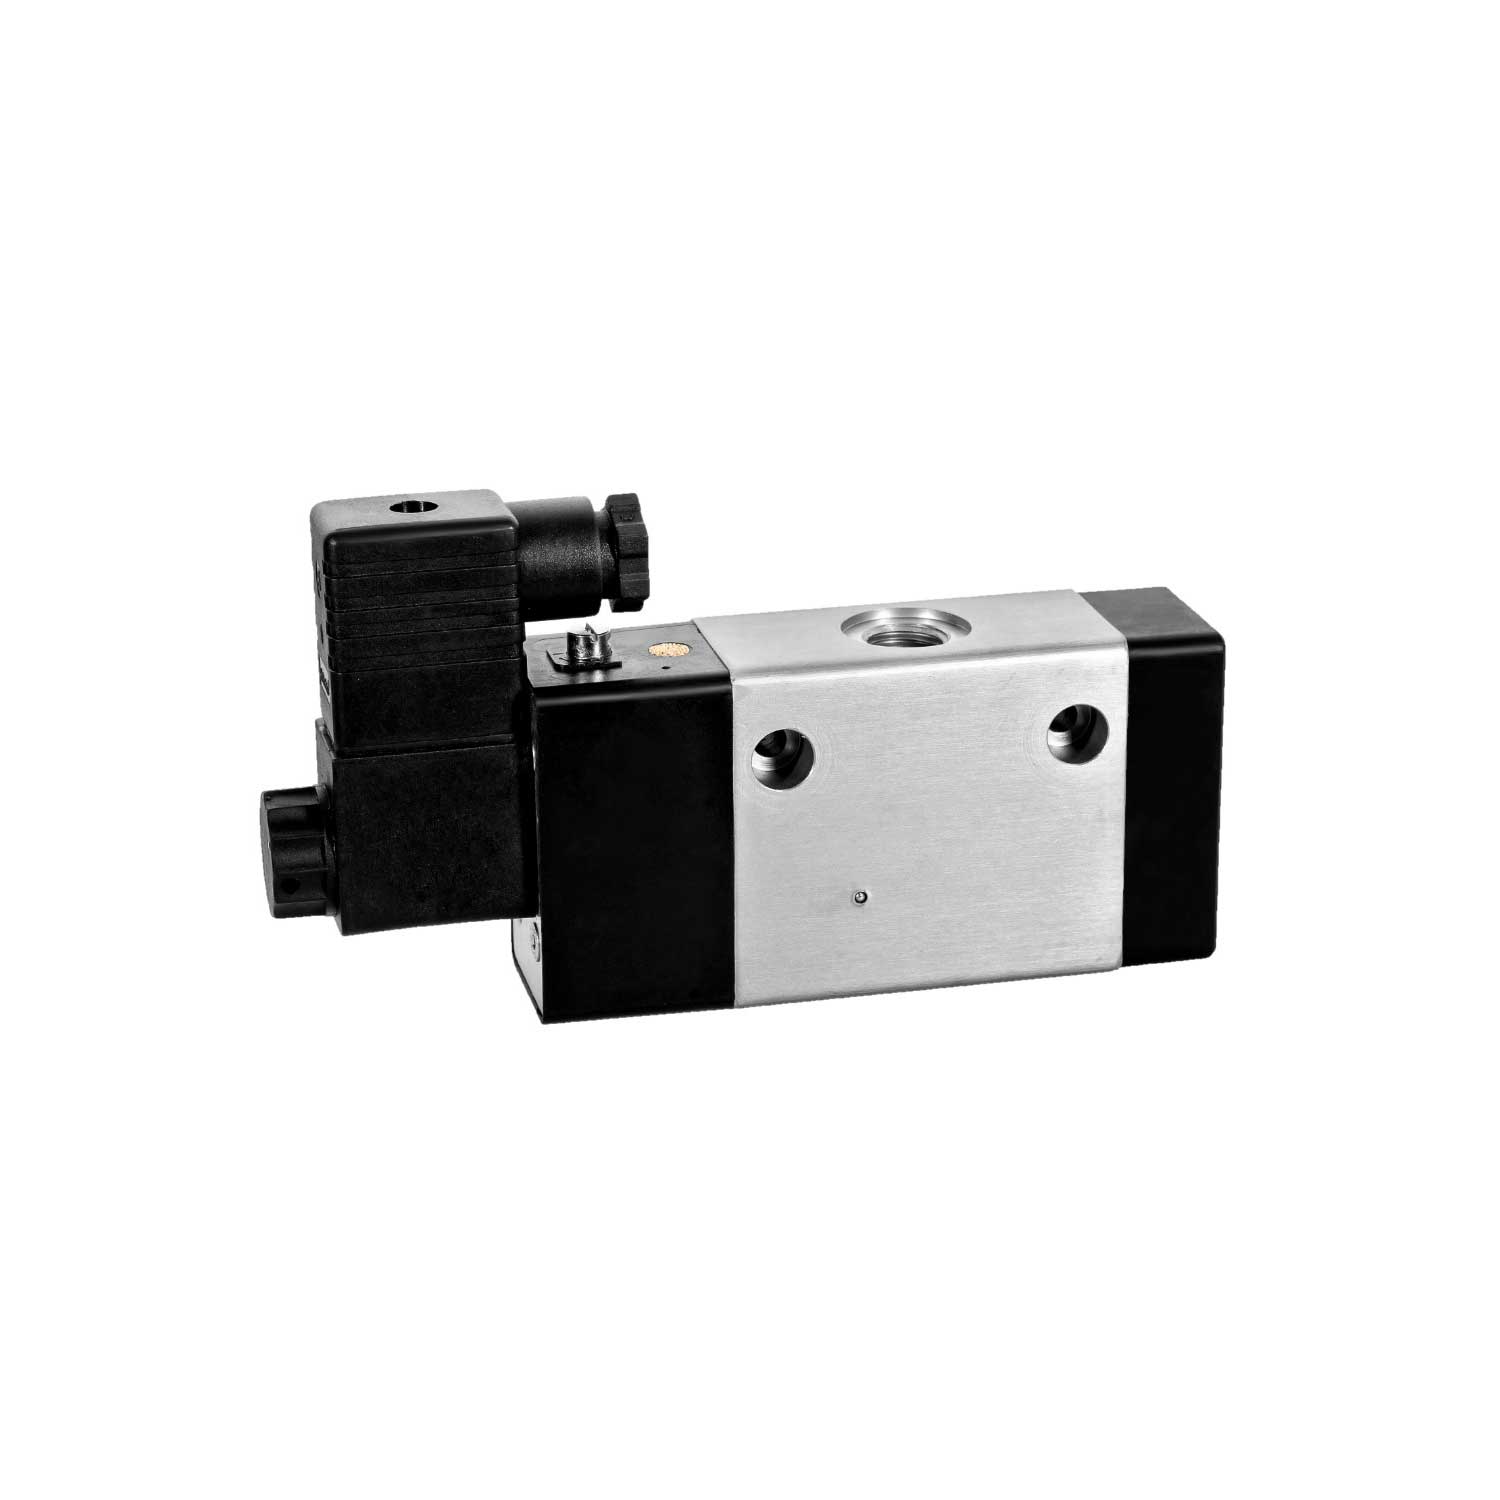 Single coil and double coil 3/2 way solenoid valves